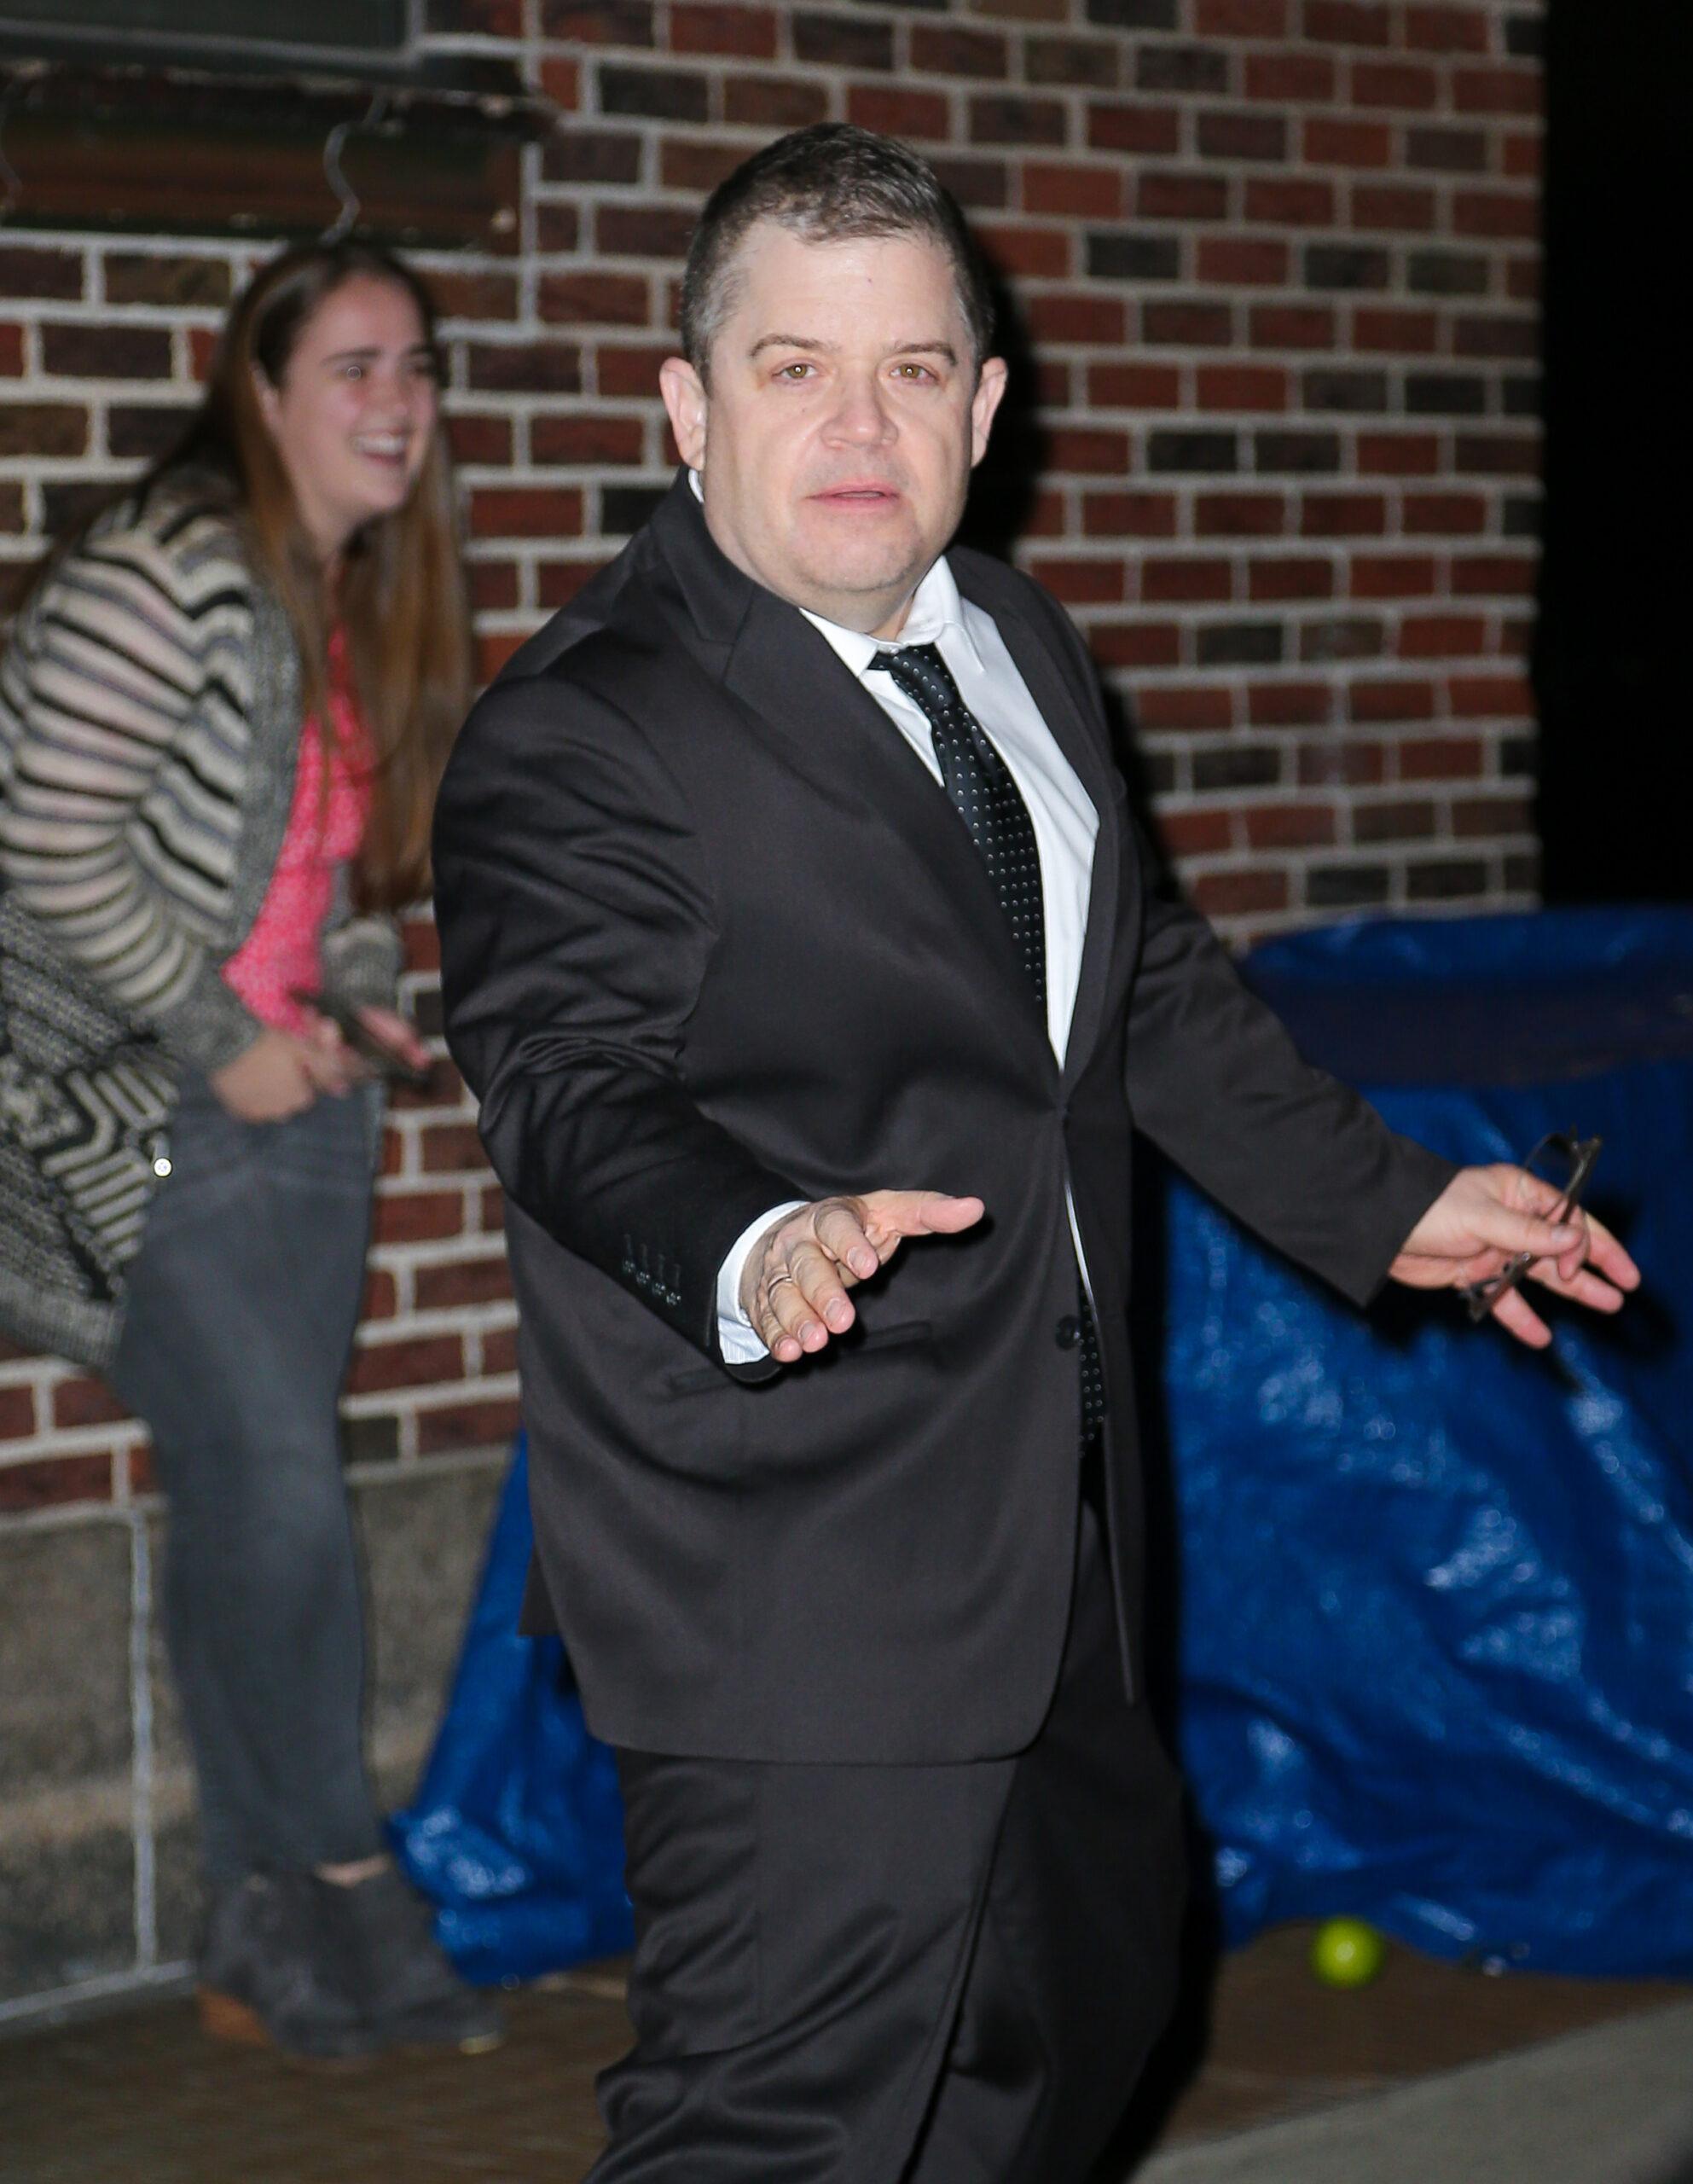 Patton Oswalt seen posing while leaving The Late Show with Stephen Colbert in NYC